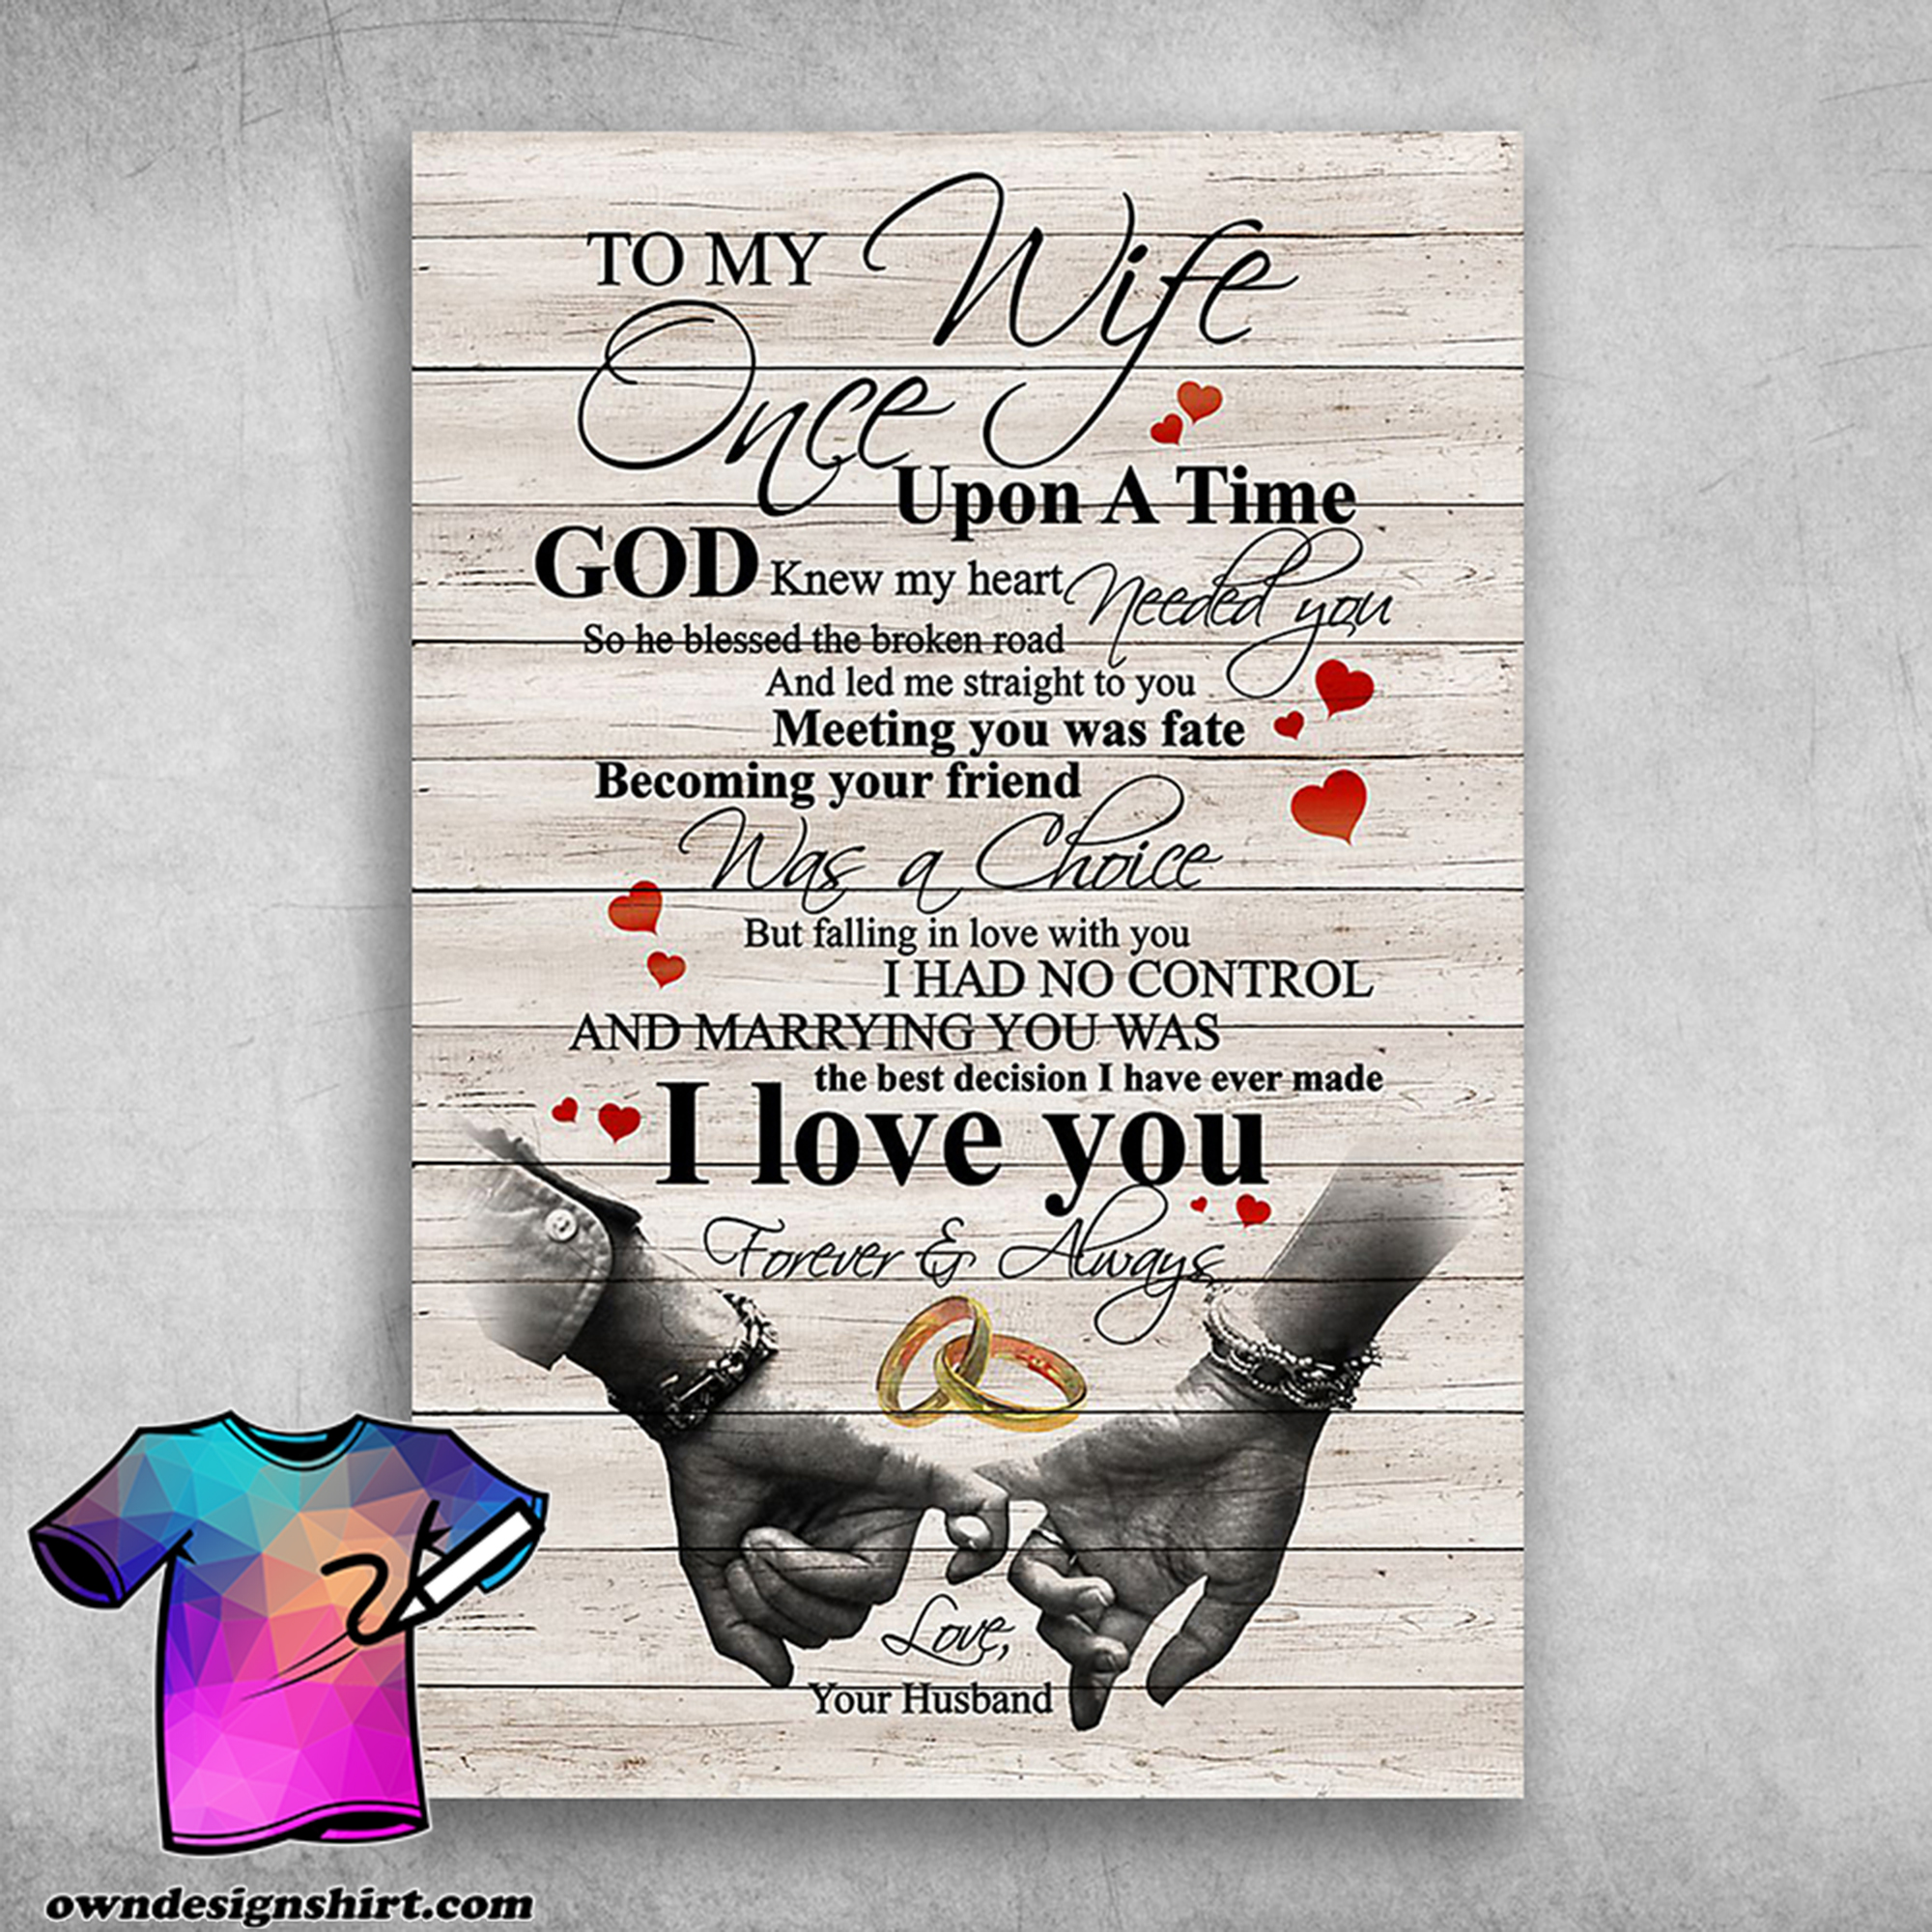 To my wife once upon a time god knew my heart needed you poster